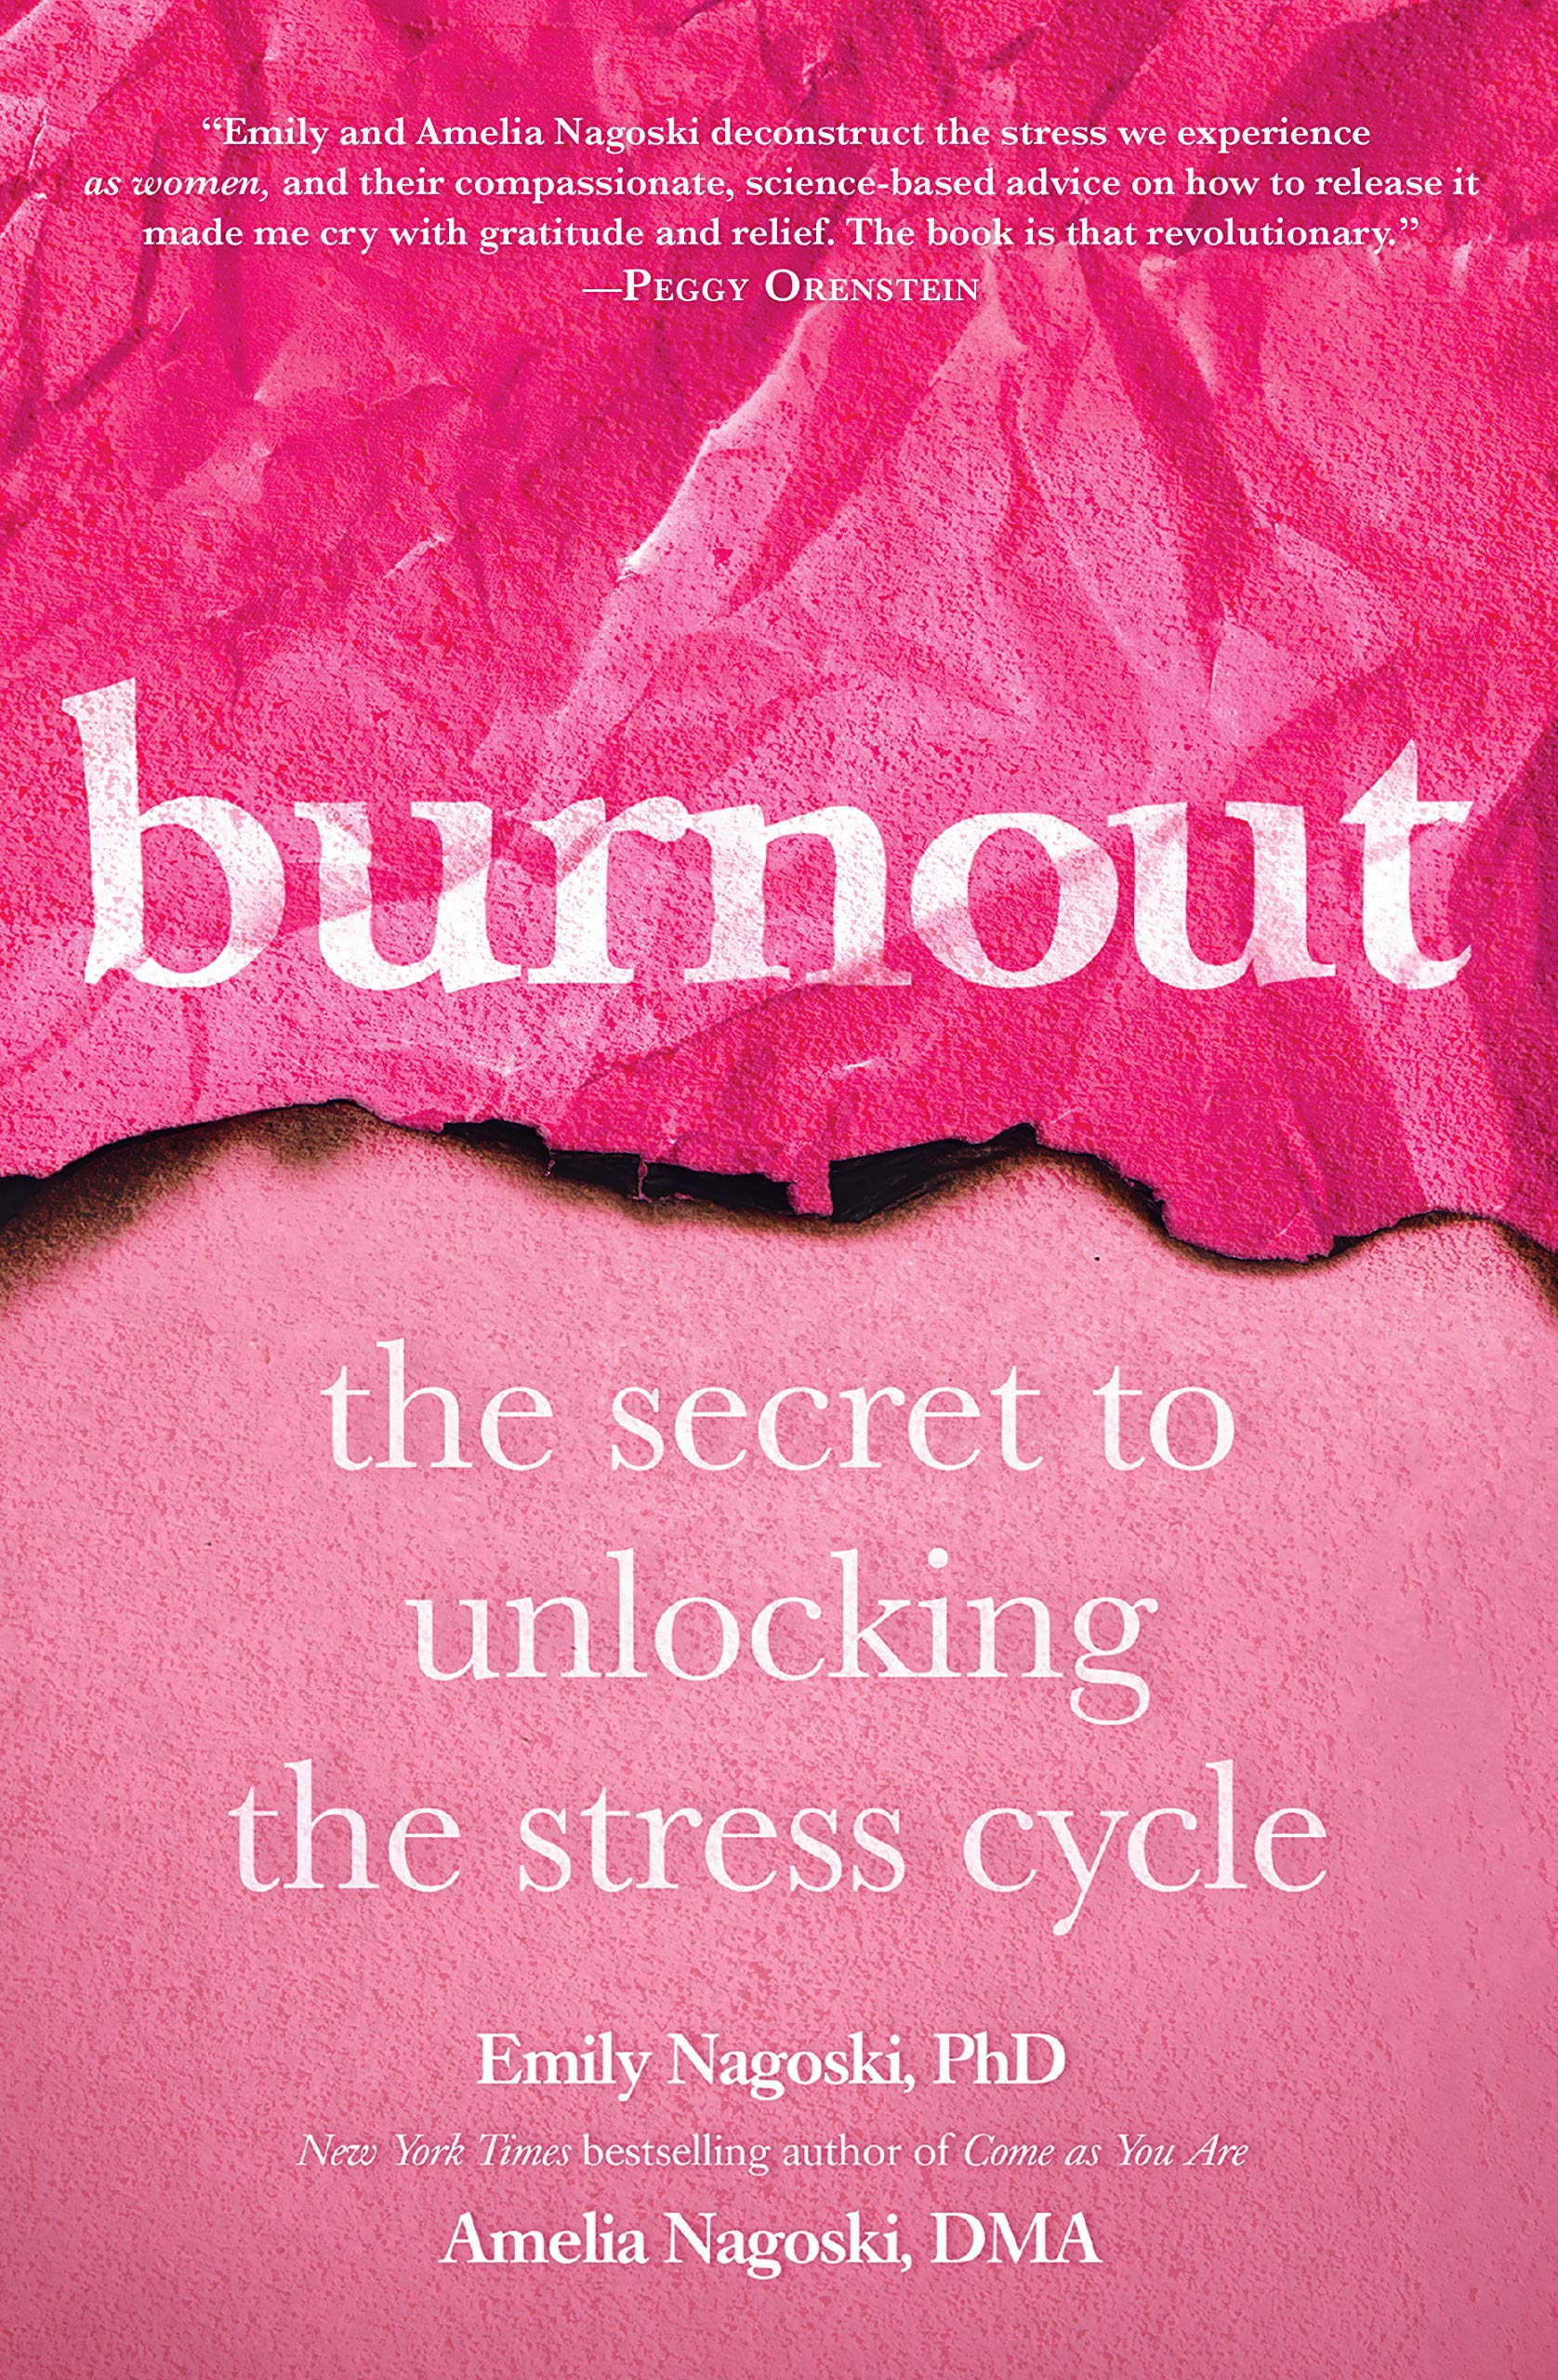 'Burnout: The Secret to Unlocking the Stress Cycle' by Emily Nagoski